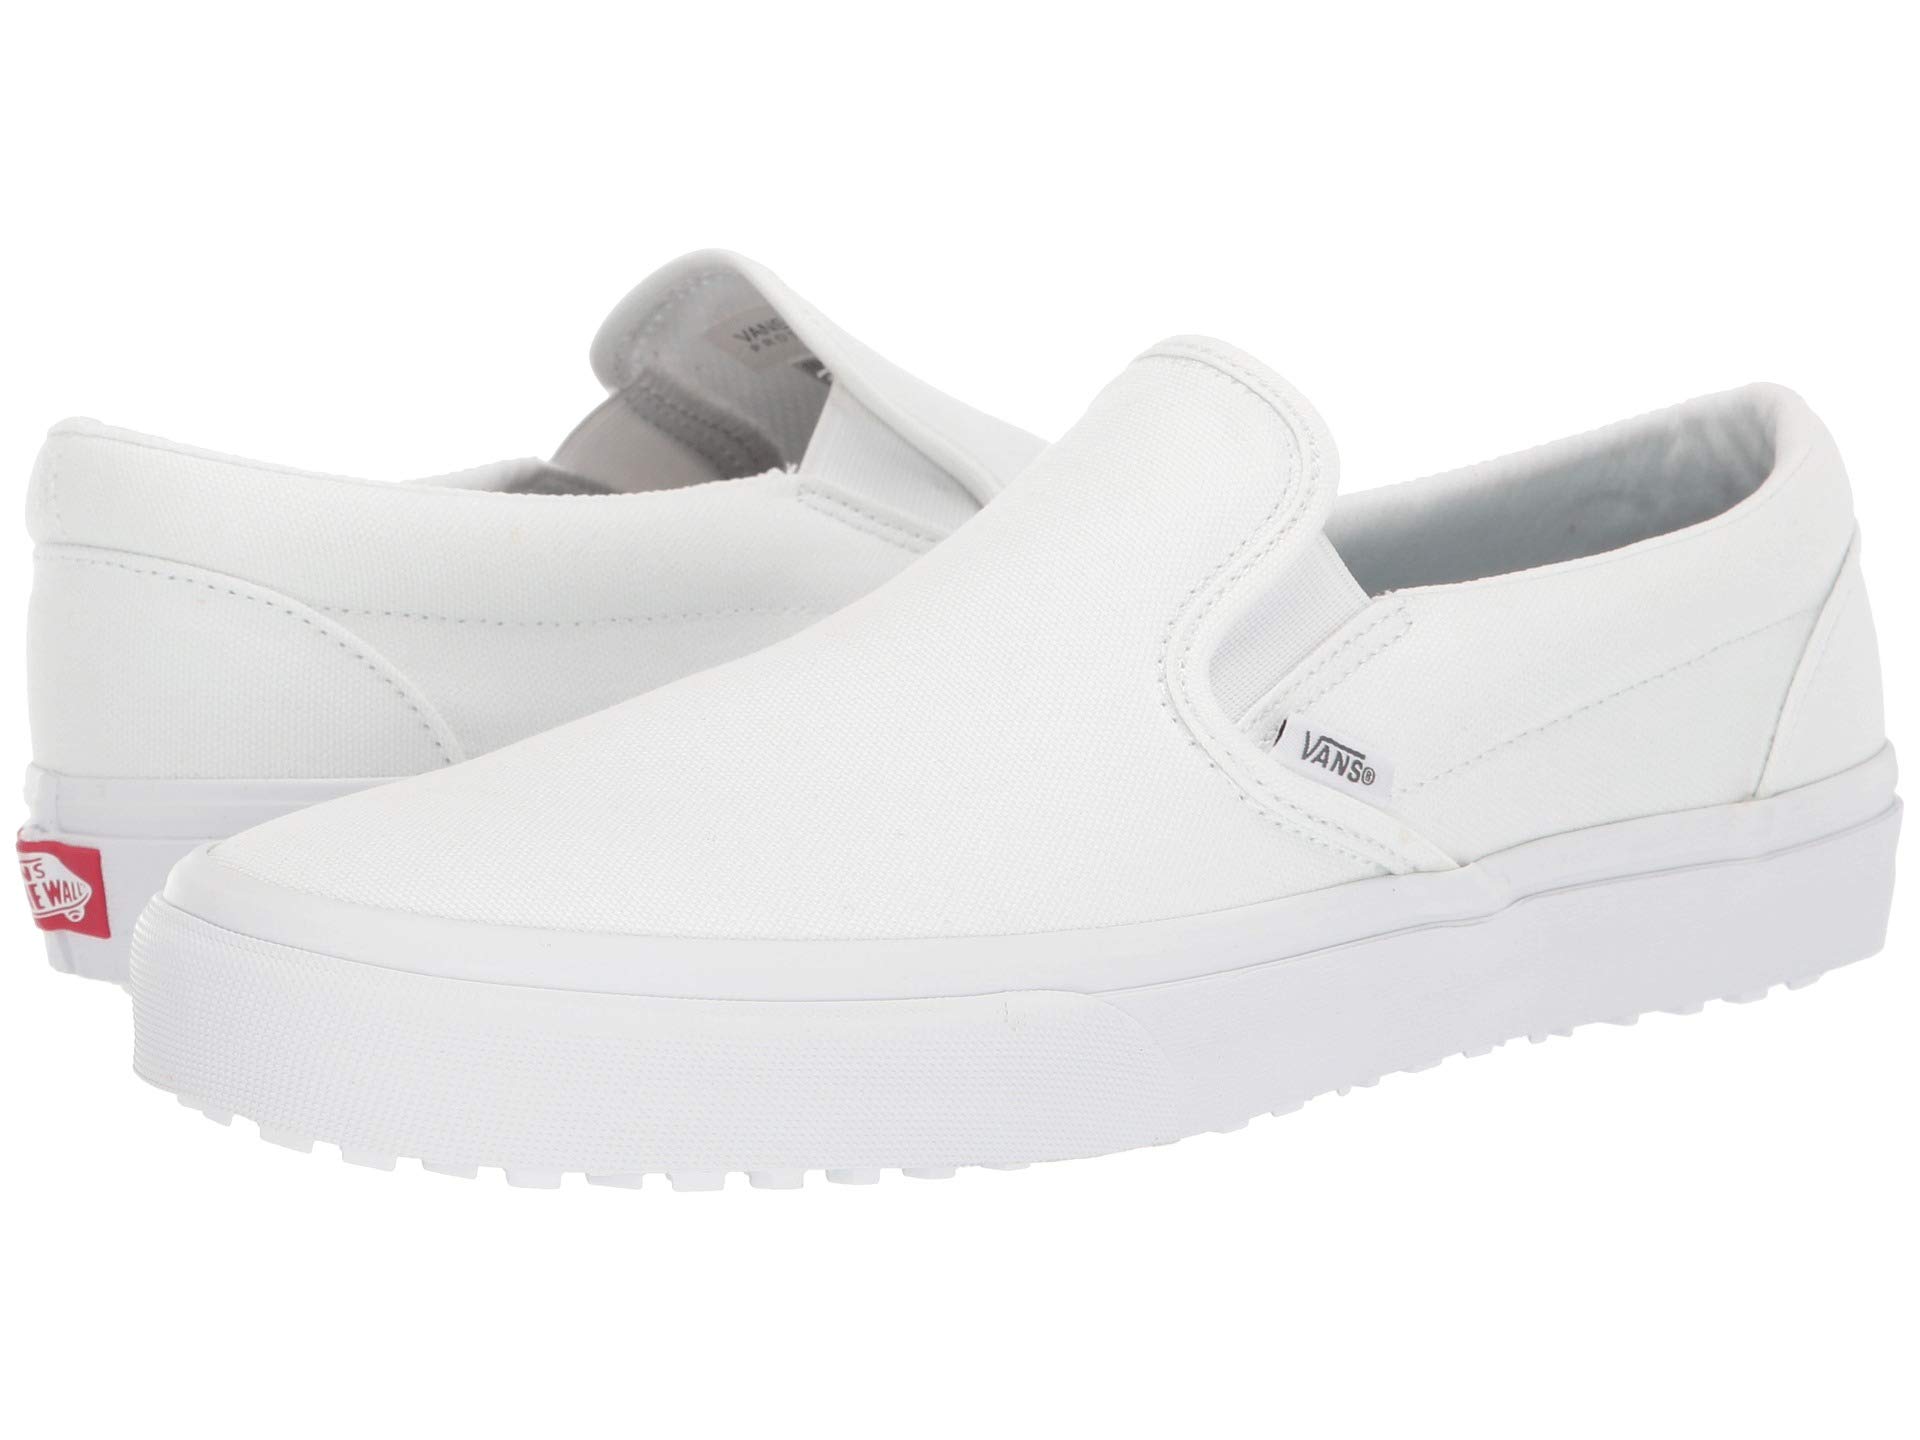 Best Trendy Women's White Sneakers In 2020 - Live One Good Life